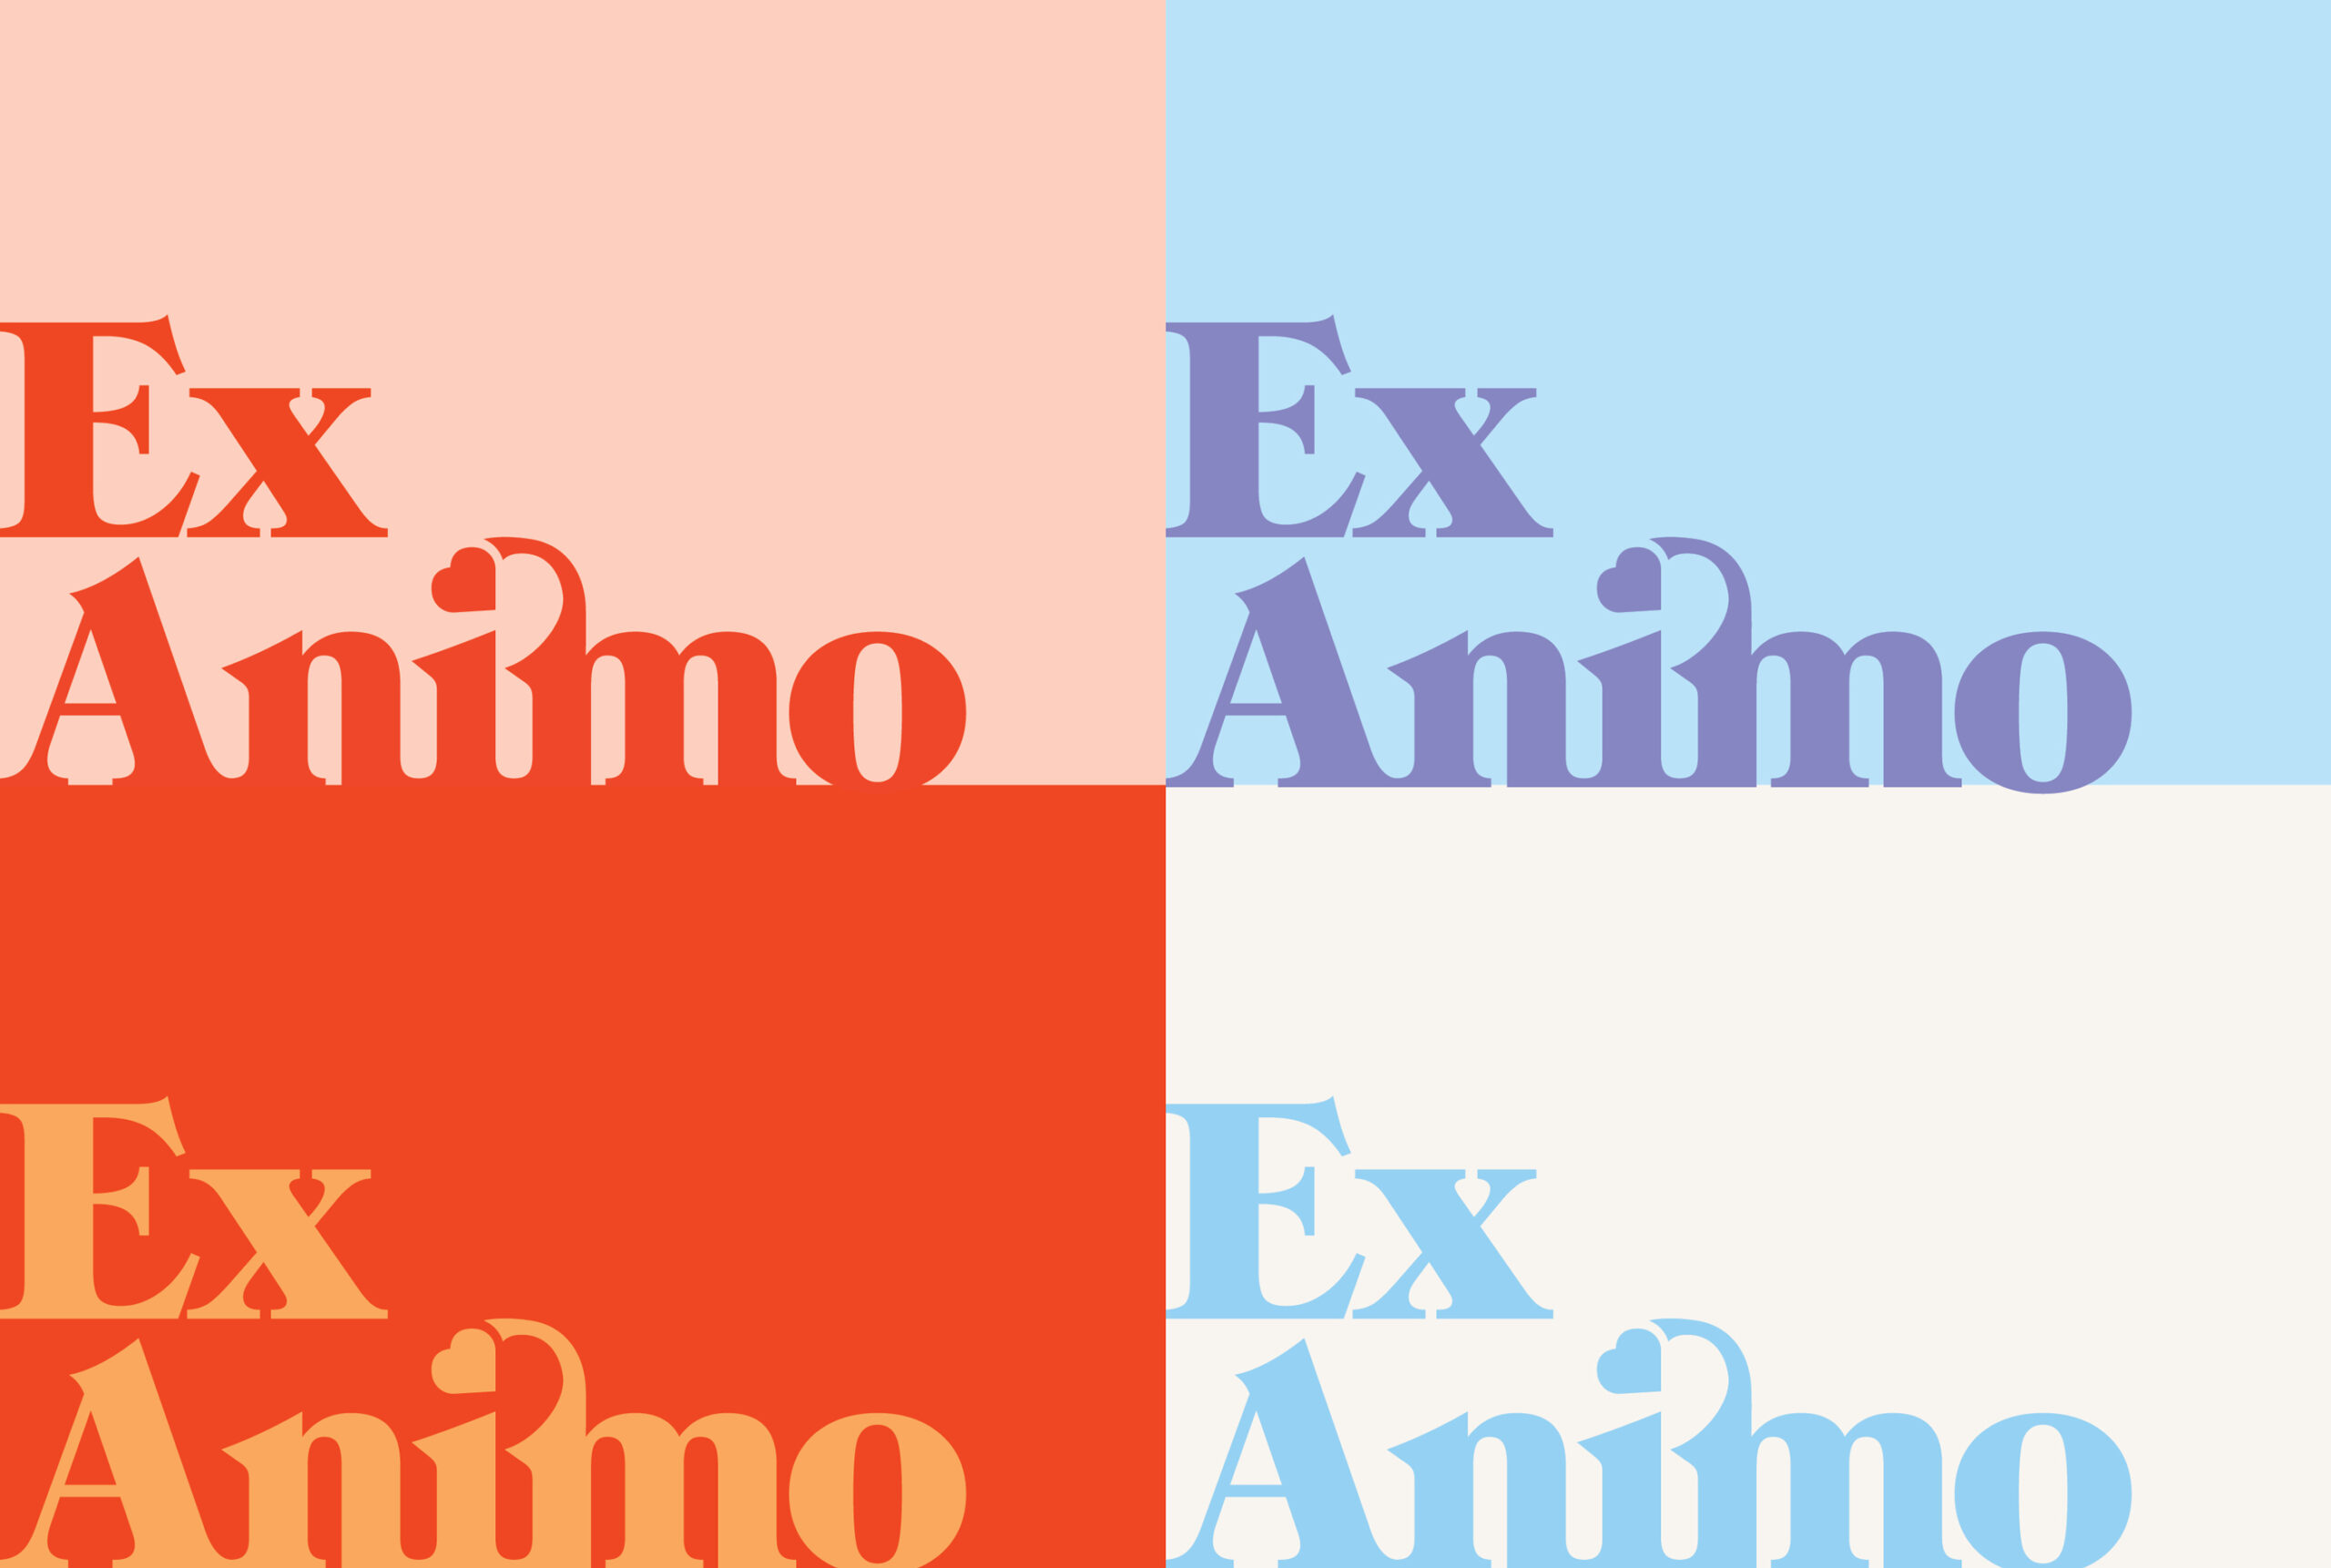 Ex Animo Advisory Tax & Accounting, Graphic Design, Website and Branding Design and Development by TL Design Co.